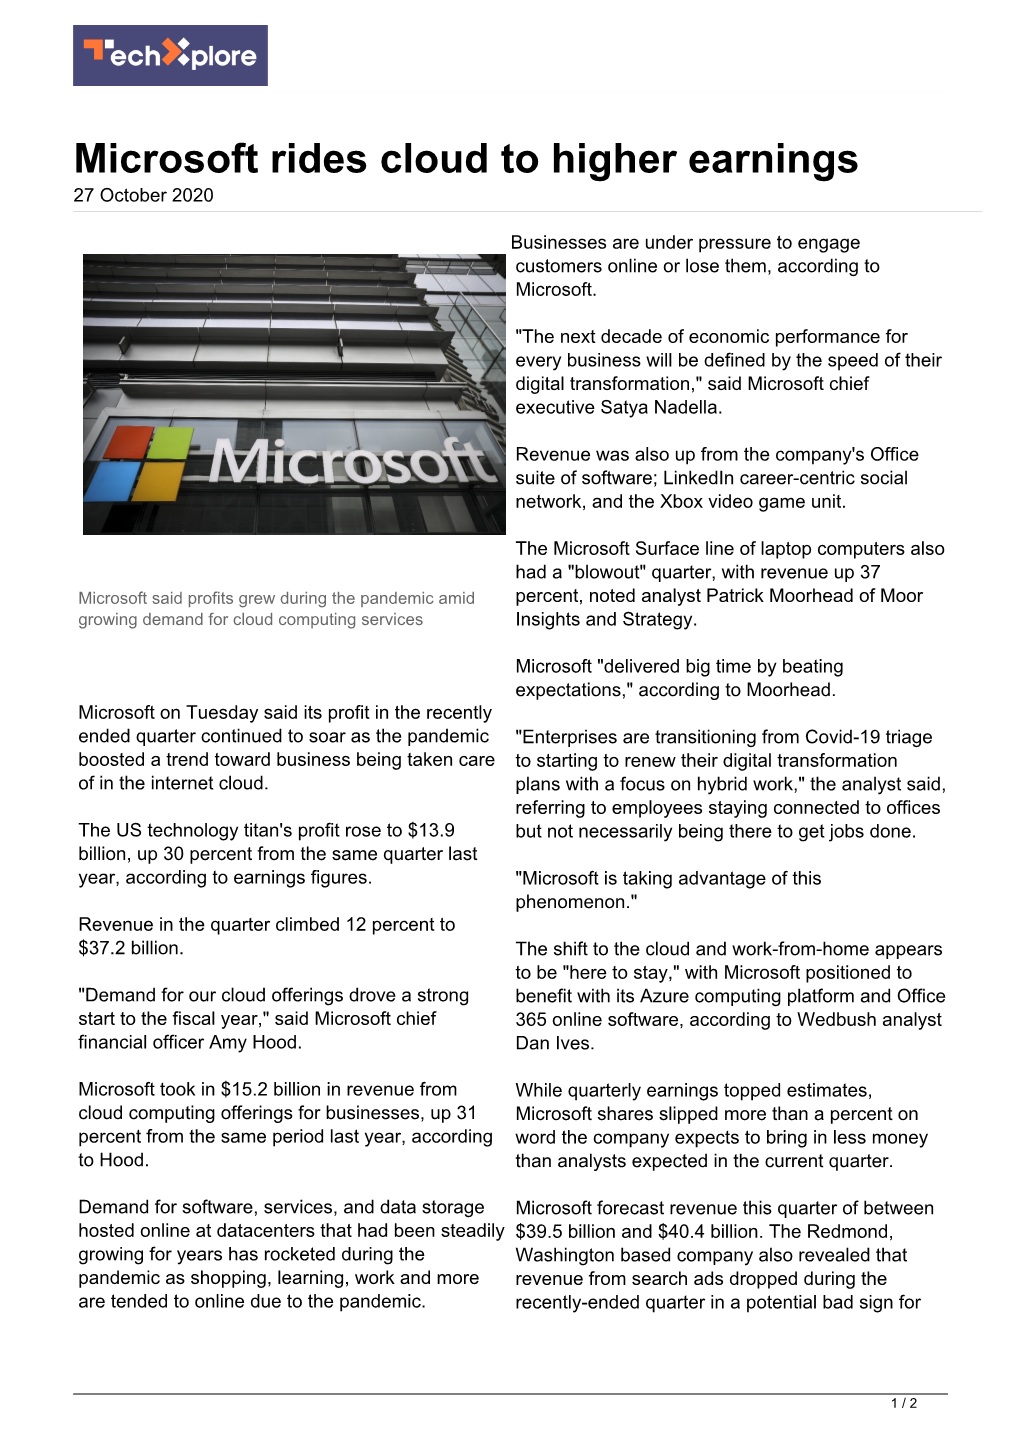 Microsoft Rides Cloud to Higher Earnings 27 October 2020